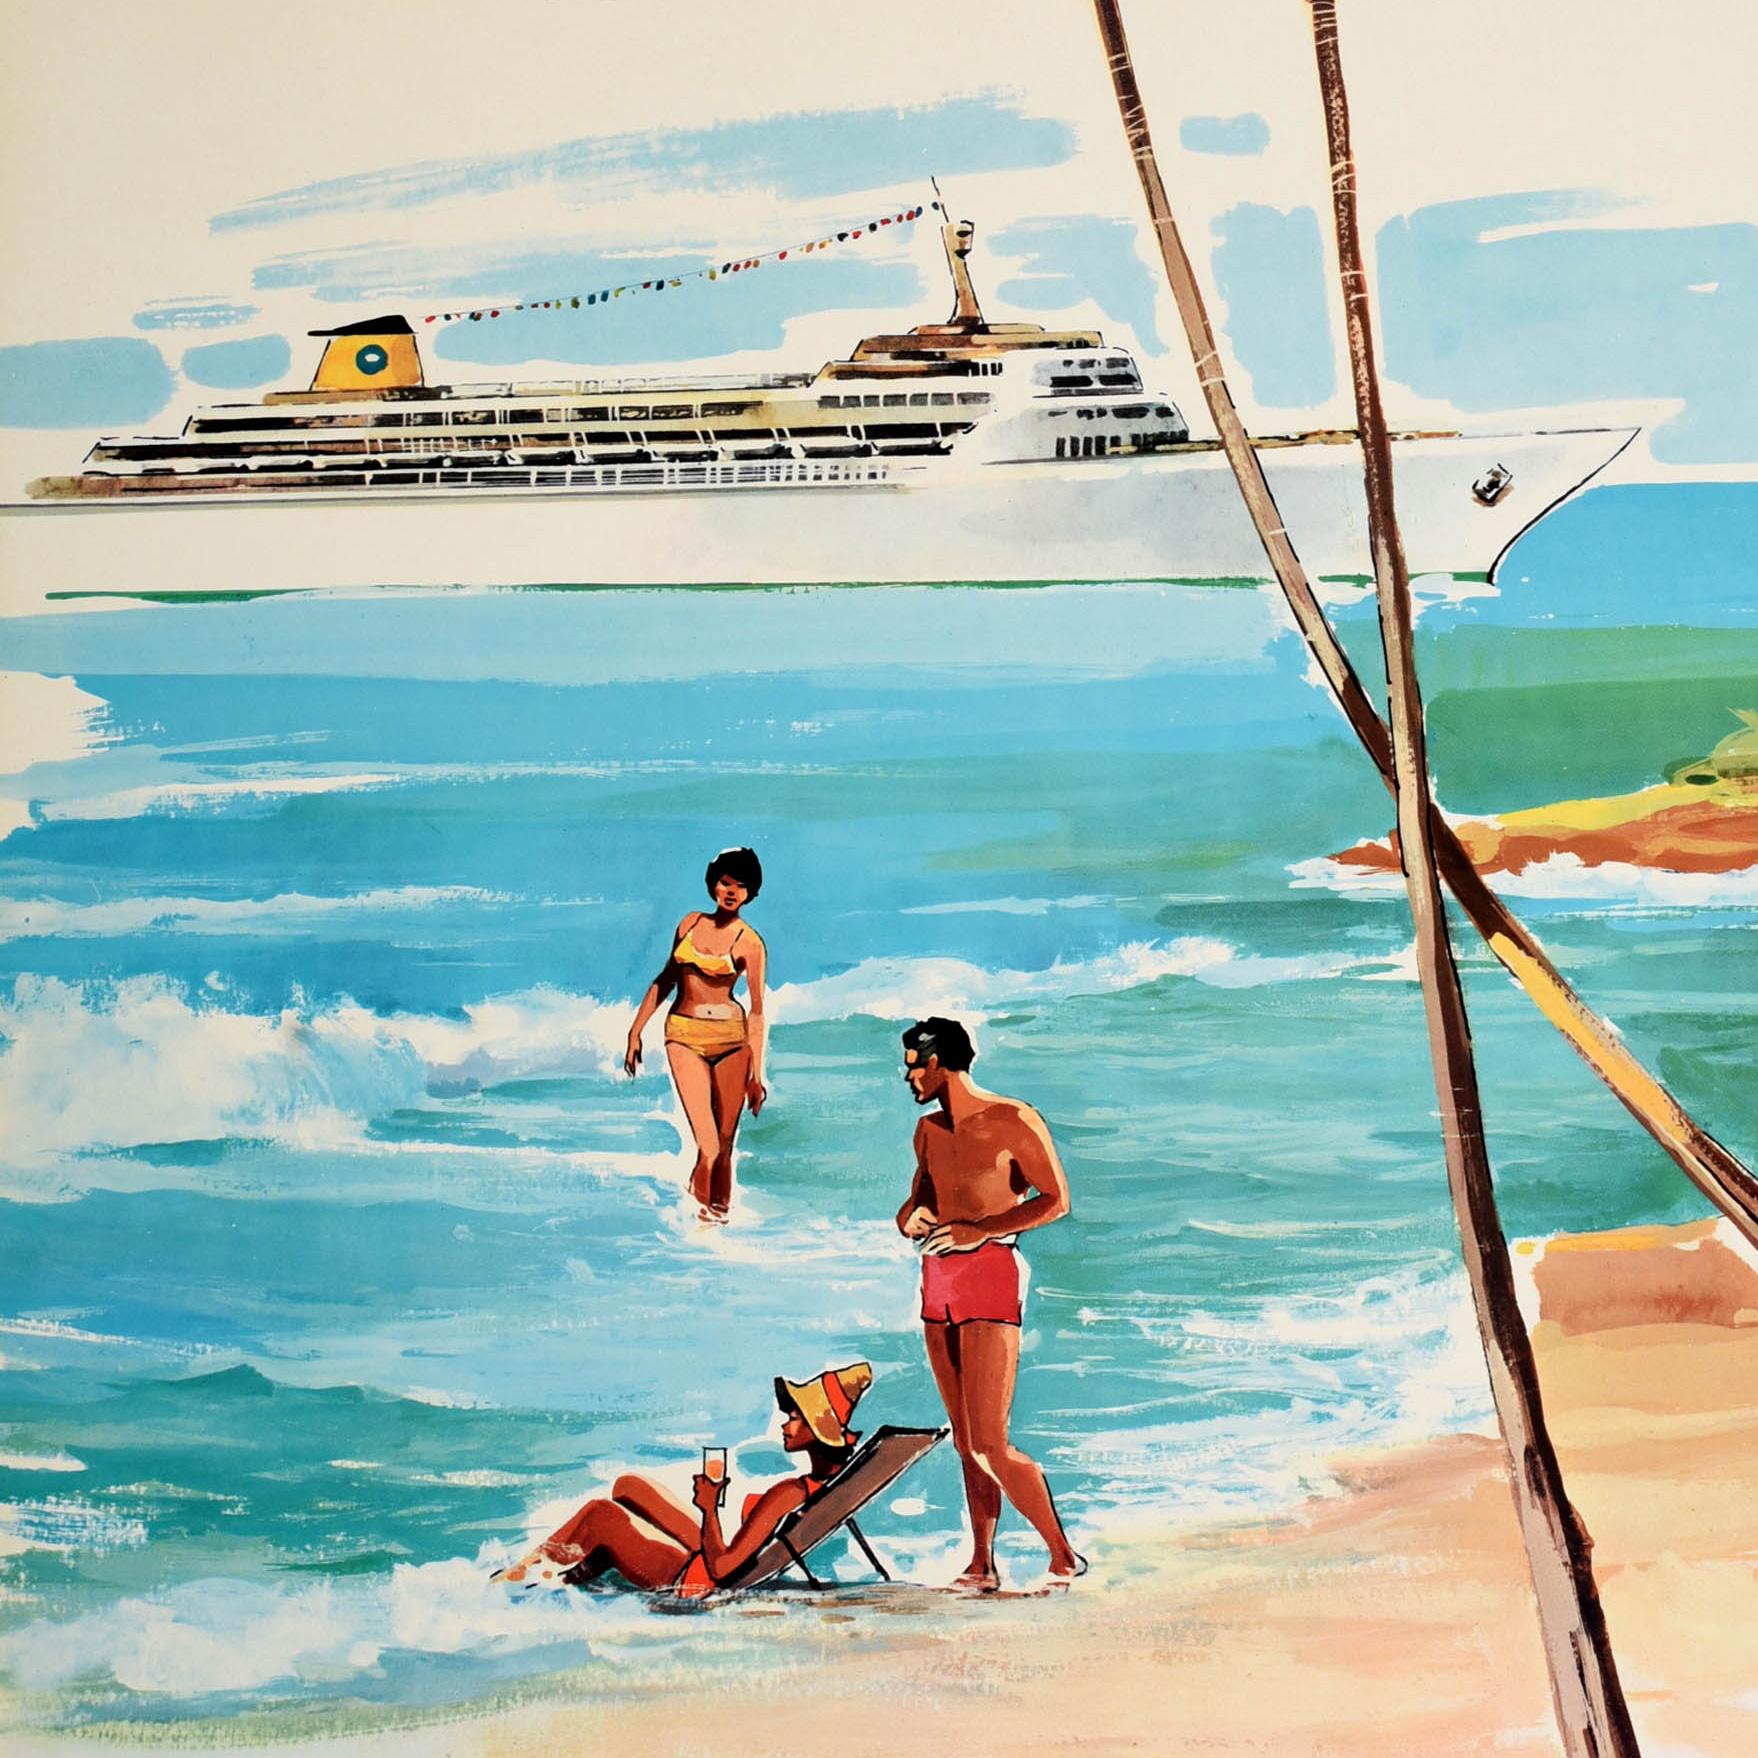 Original vintage travel poster - Home Lines Cruise with S.S. Oceanic to the Bahamas Bermuda and the Caribbean - featuring a great image depicting passengers from a cruise holiday relaxing on a sandy beach below palm trees with a lady in a sun hat